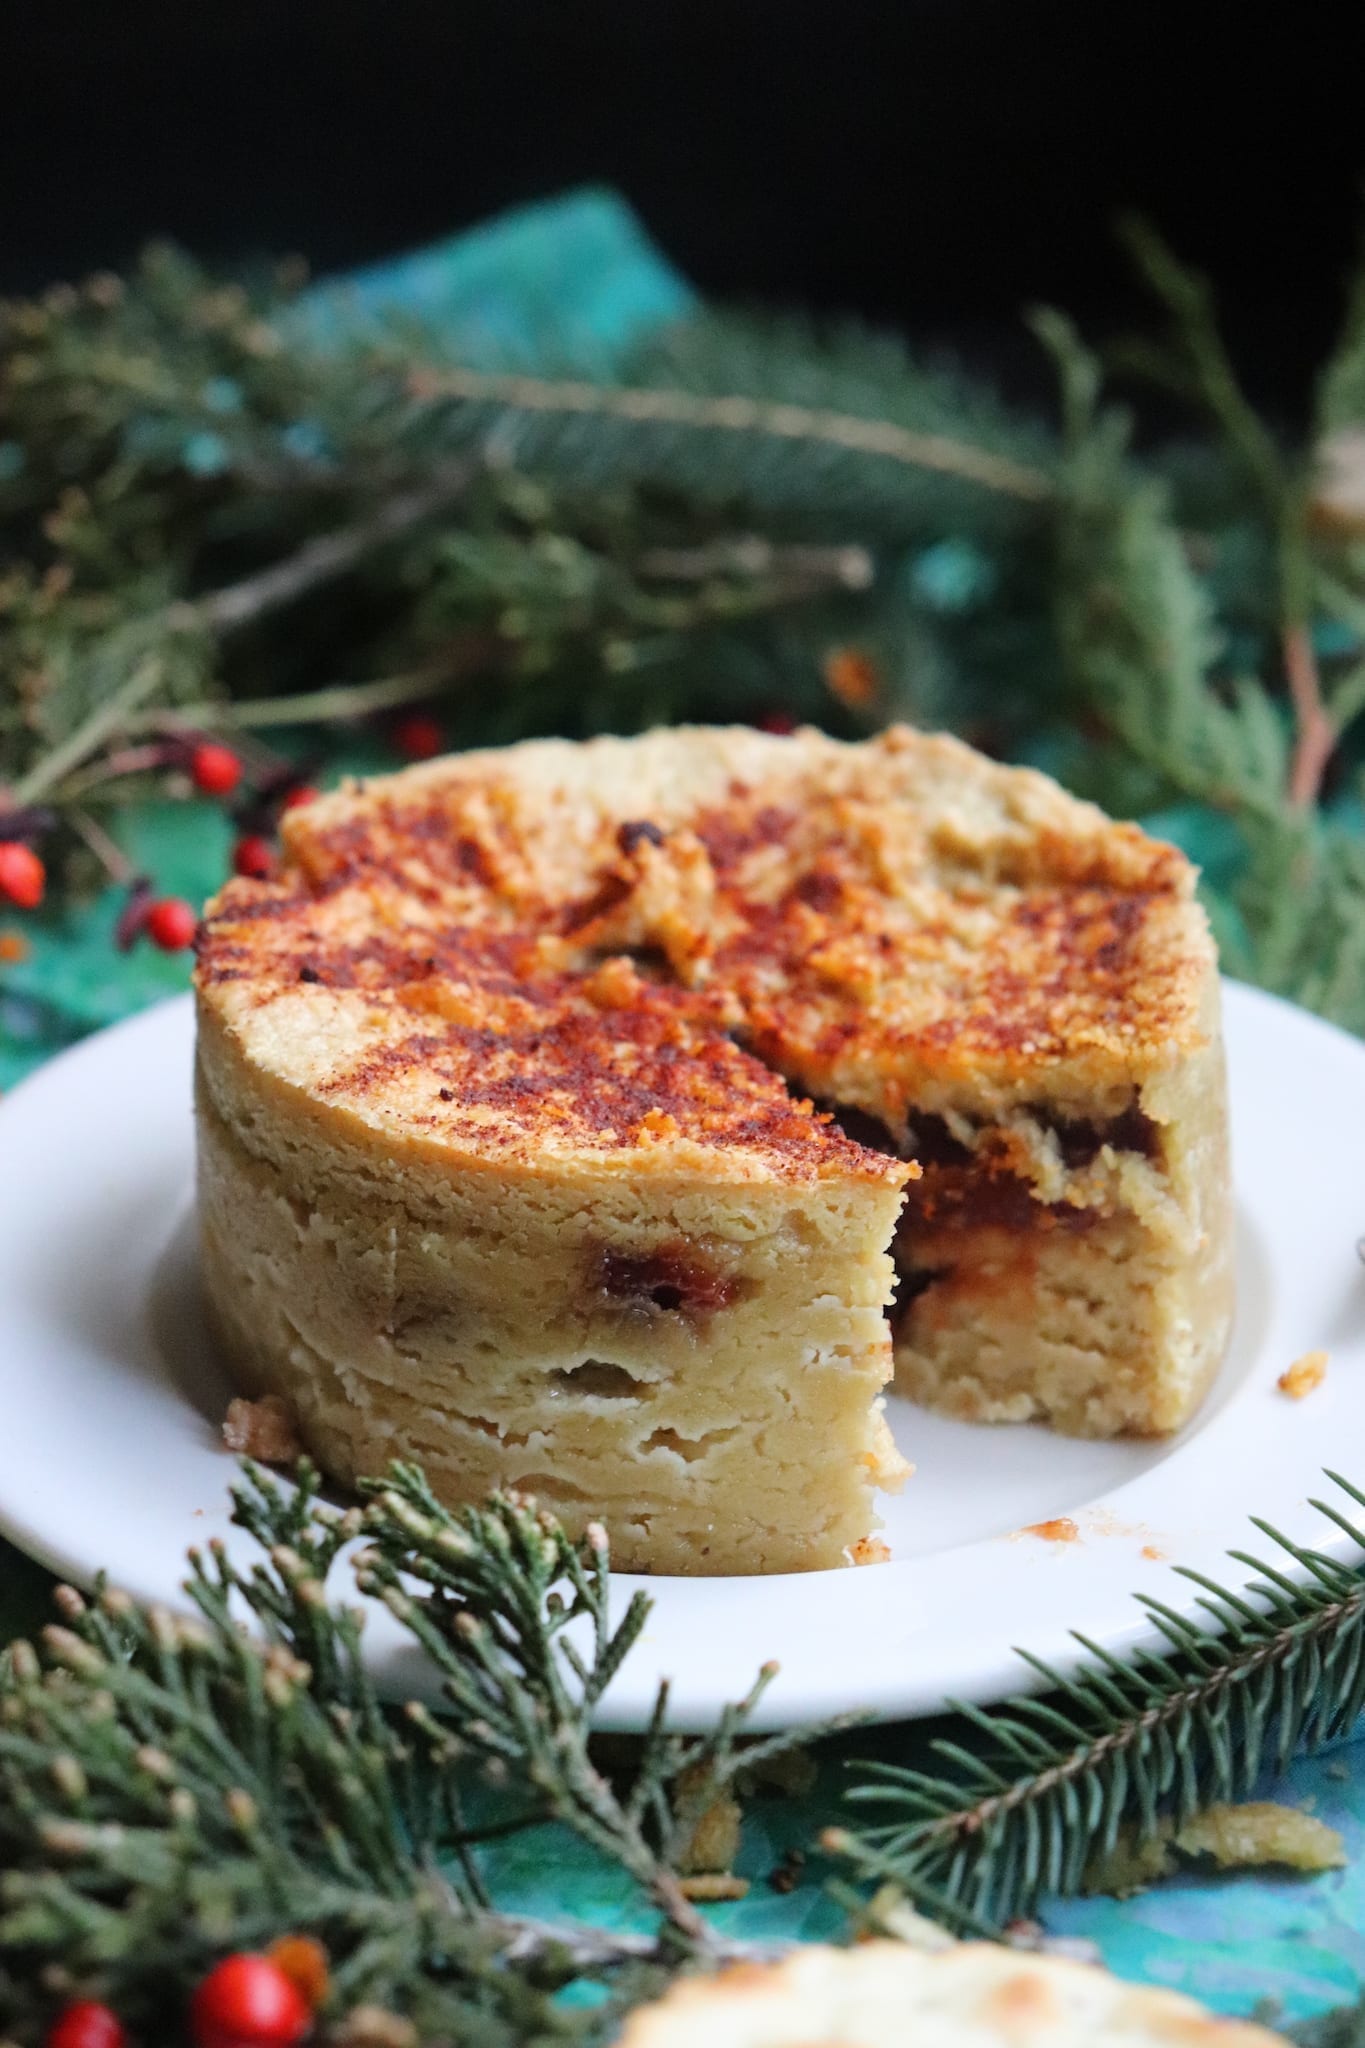 Vegan Holiday Recipes, Baked Vegan Cheese with Guava